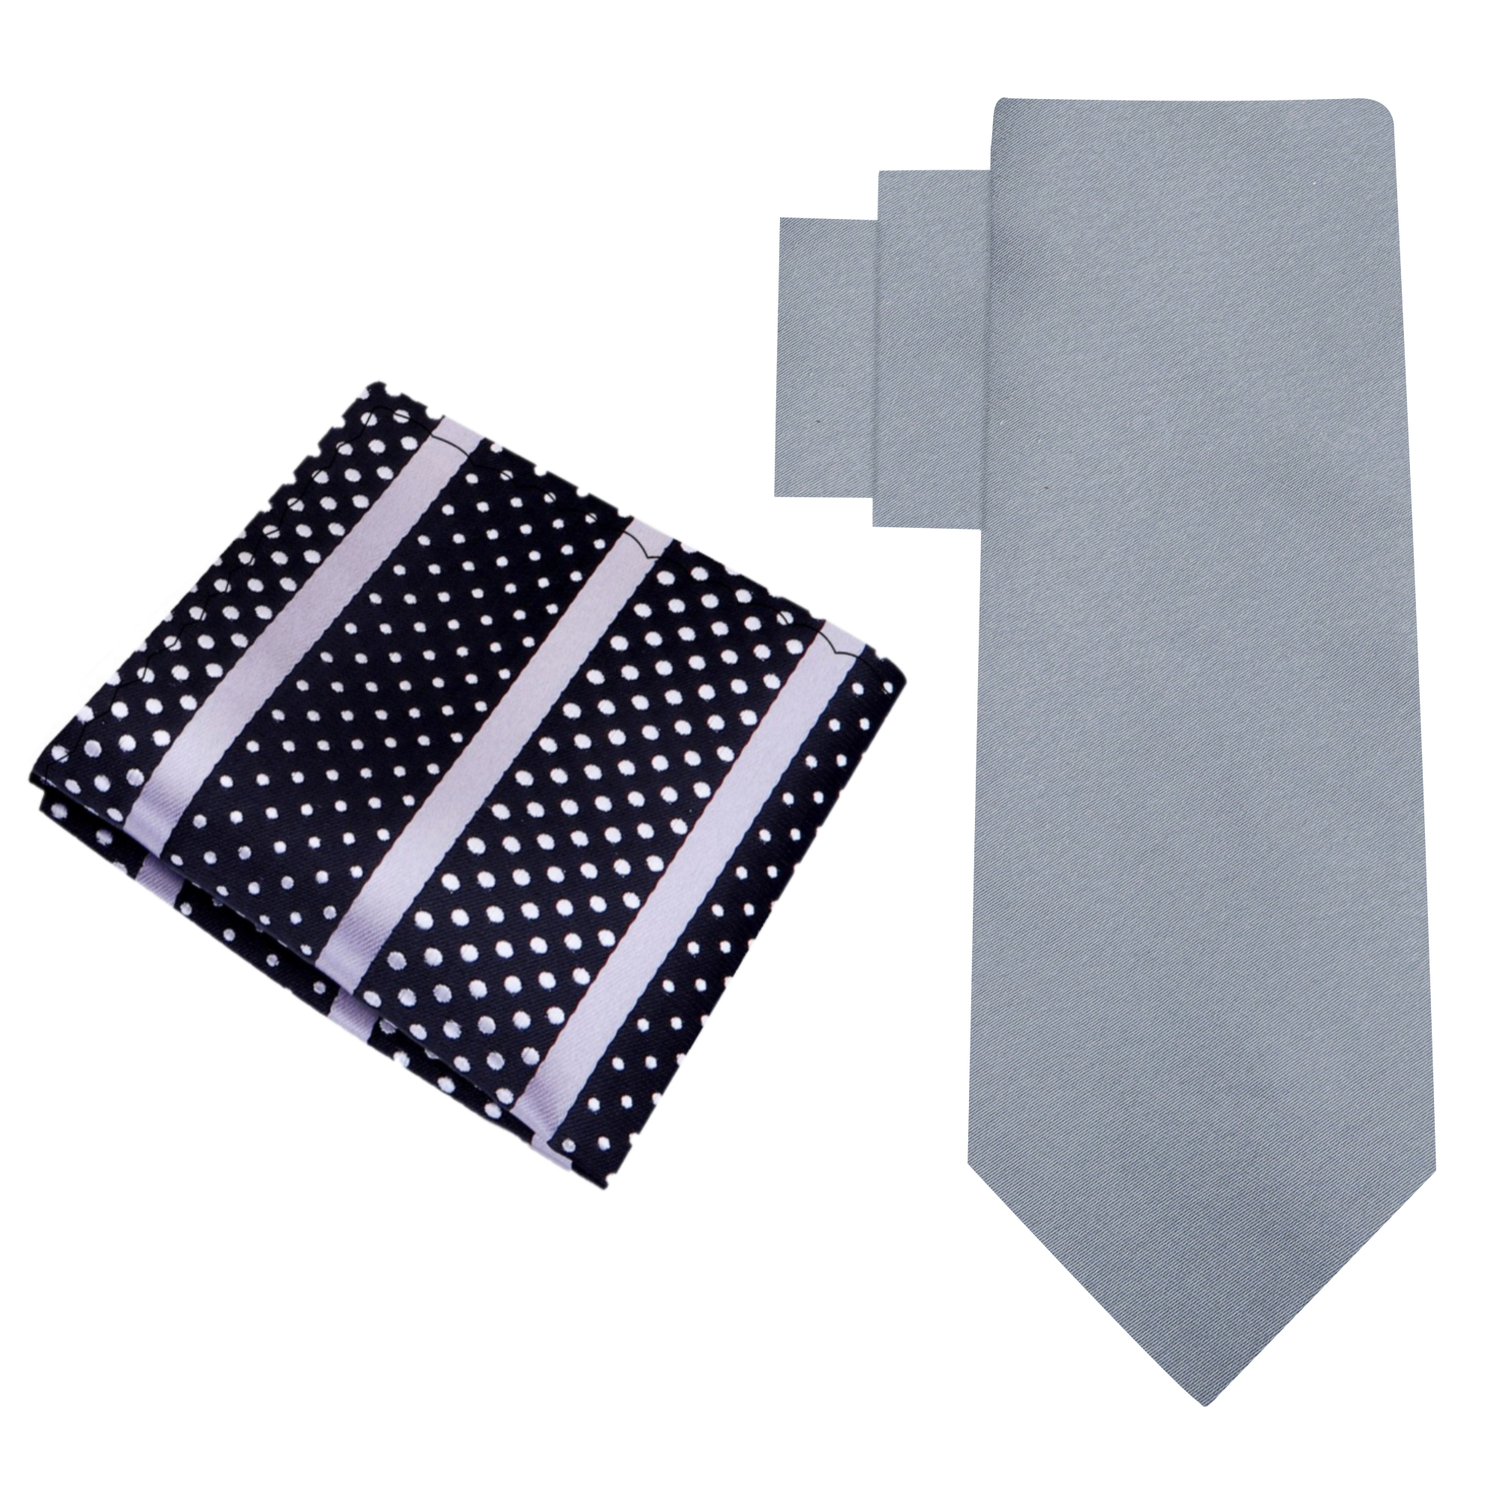 Alt: Grey Necktie and Accenting Square